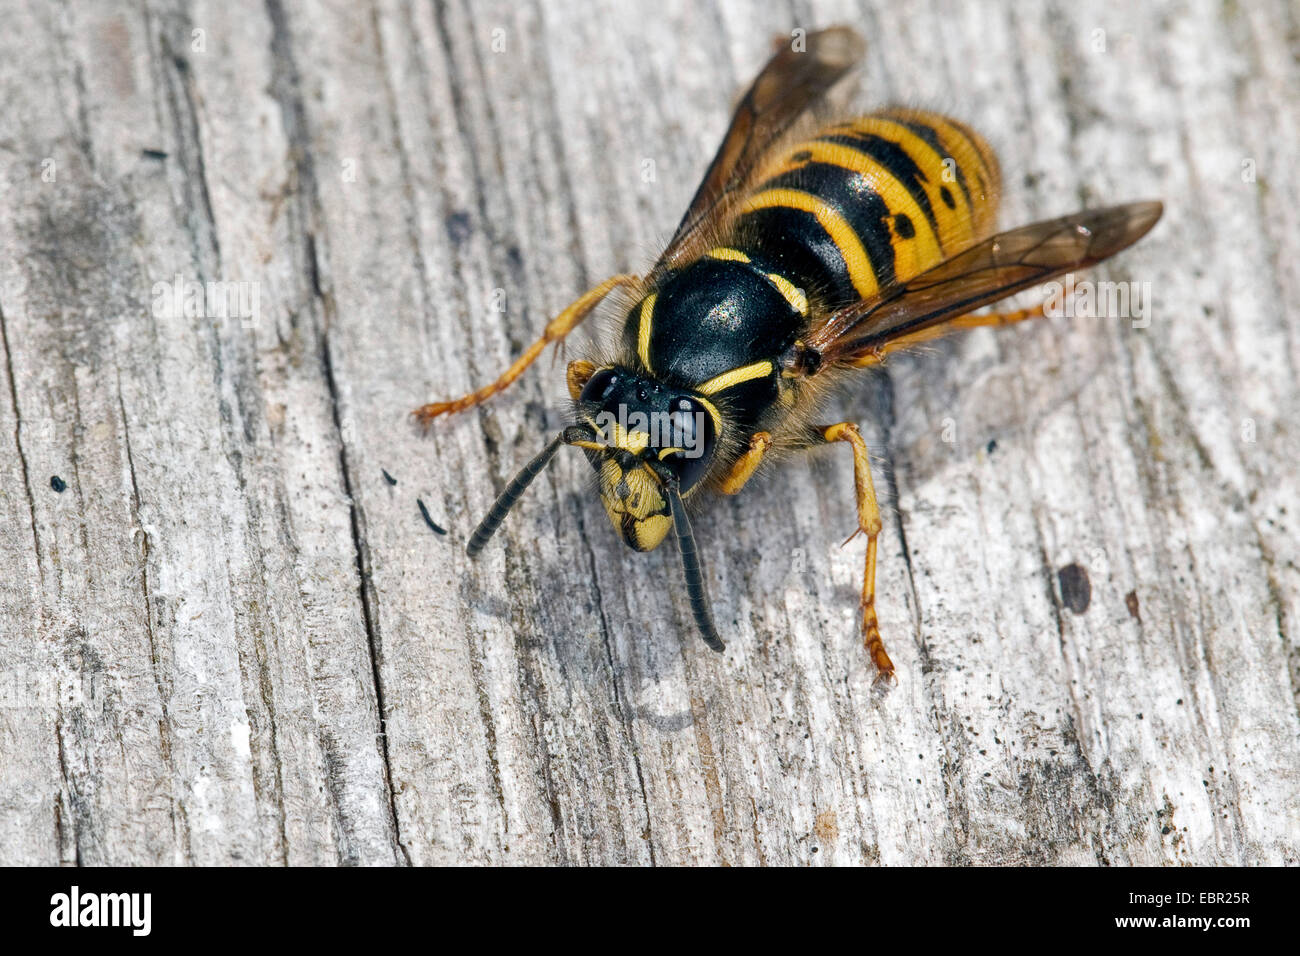 Saxon wasp (Dolichovespula saxonica, Vespula saxonica), female collecting wood for building a nest, Germany Stock Photo